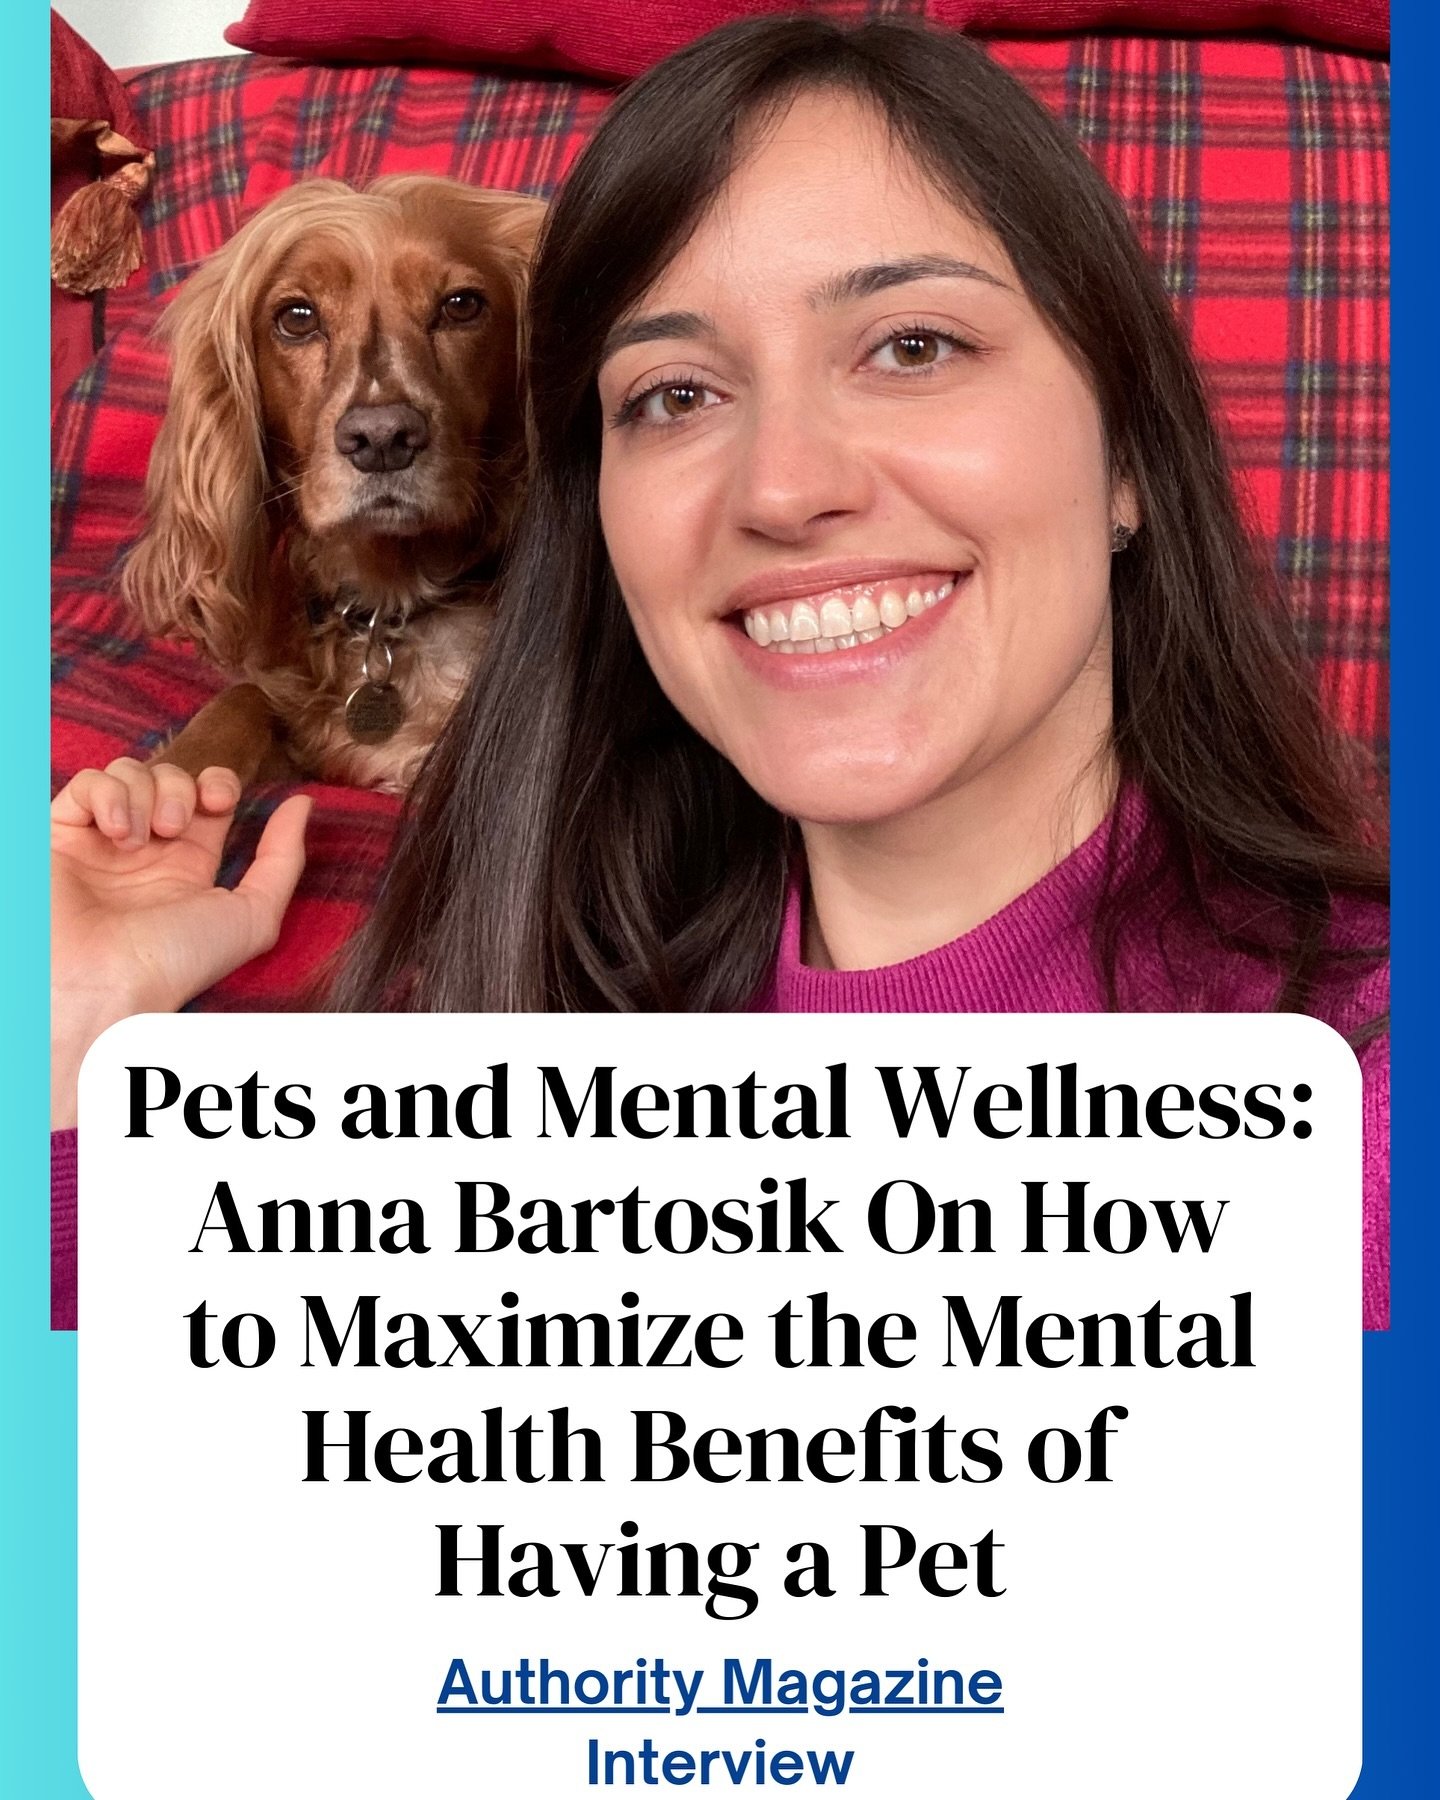 Excited to share my recent interview with @wanda_malhotra in Authority Magazine on Pets and Mental Wellness! 🐾 Check it out and let me know your thoughts in the comments below! Do you agree with the point I&rsquo;ve been making in the interview? 
Ac